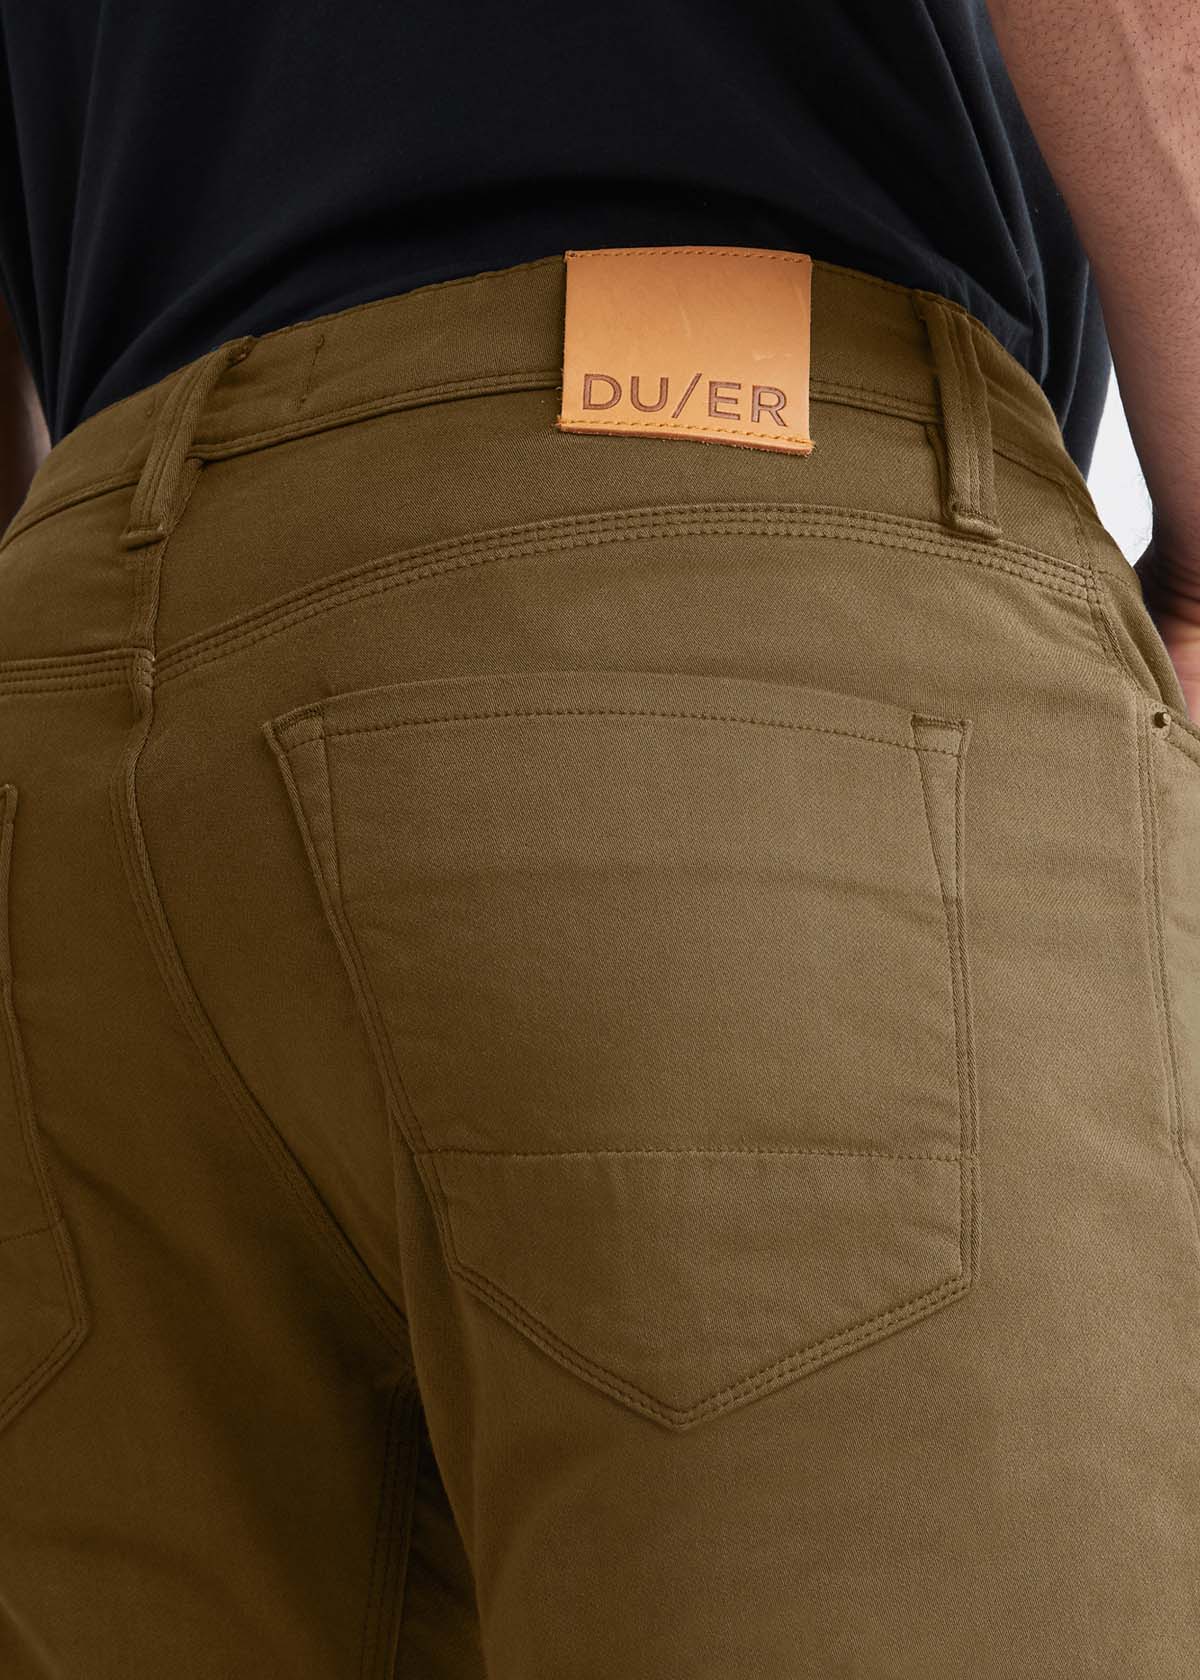 Whole Earth Provision Co.  DUER DU/ER Men's No Sweat Relaxed Pants - 32in  Inseam